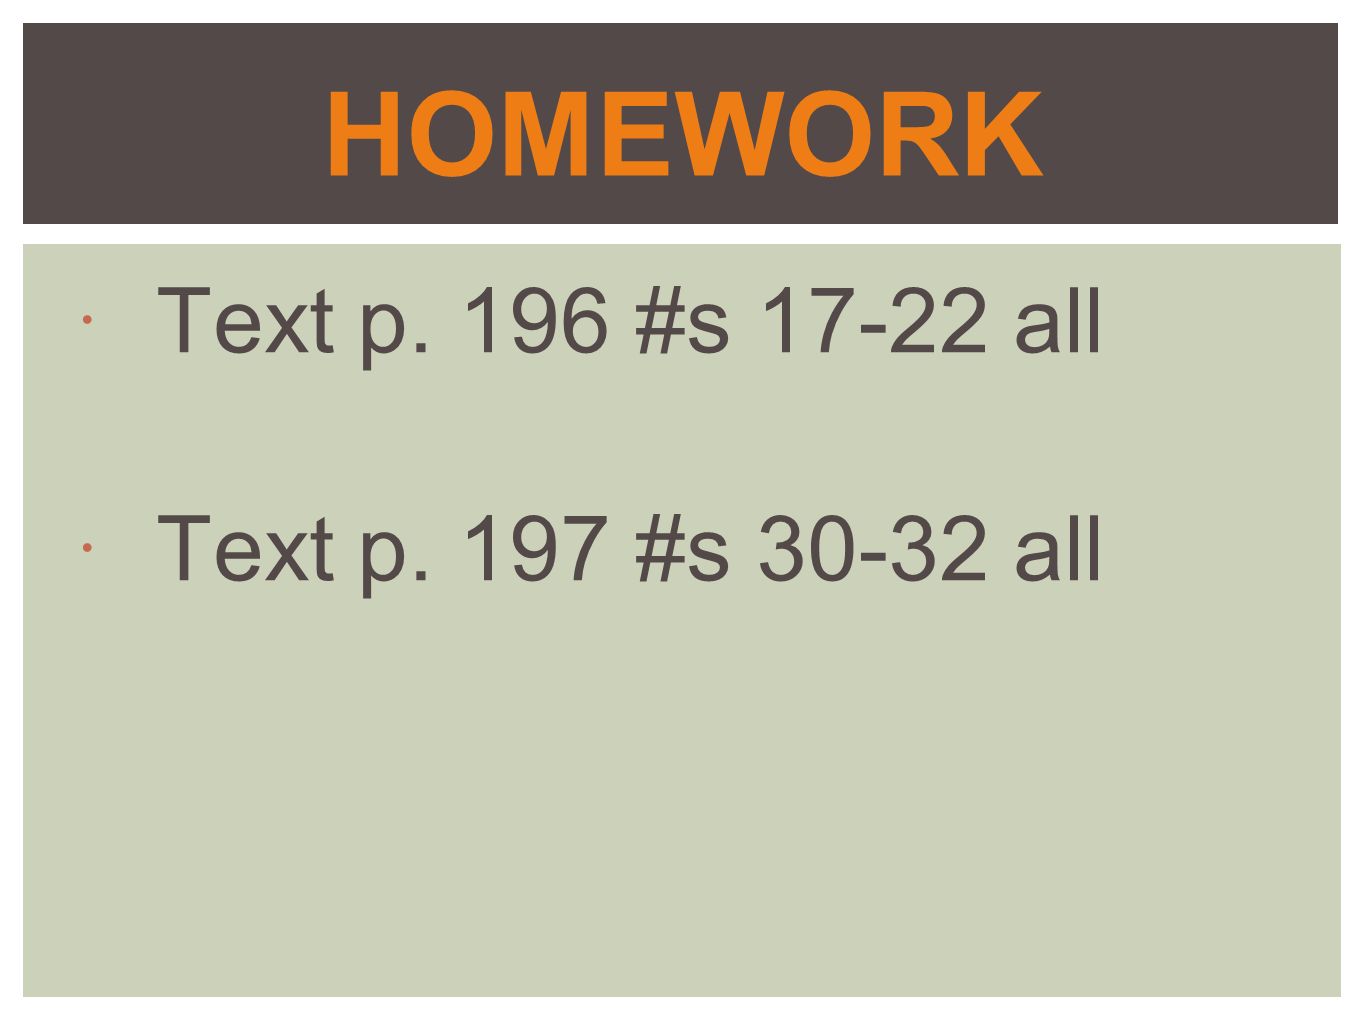 HOMEWORK Text p. 196 #s all Text p. 197 #s all